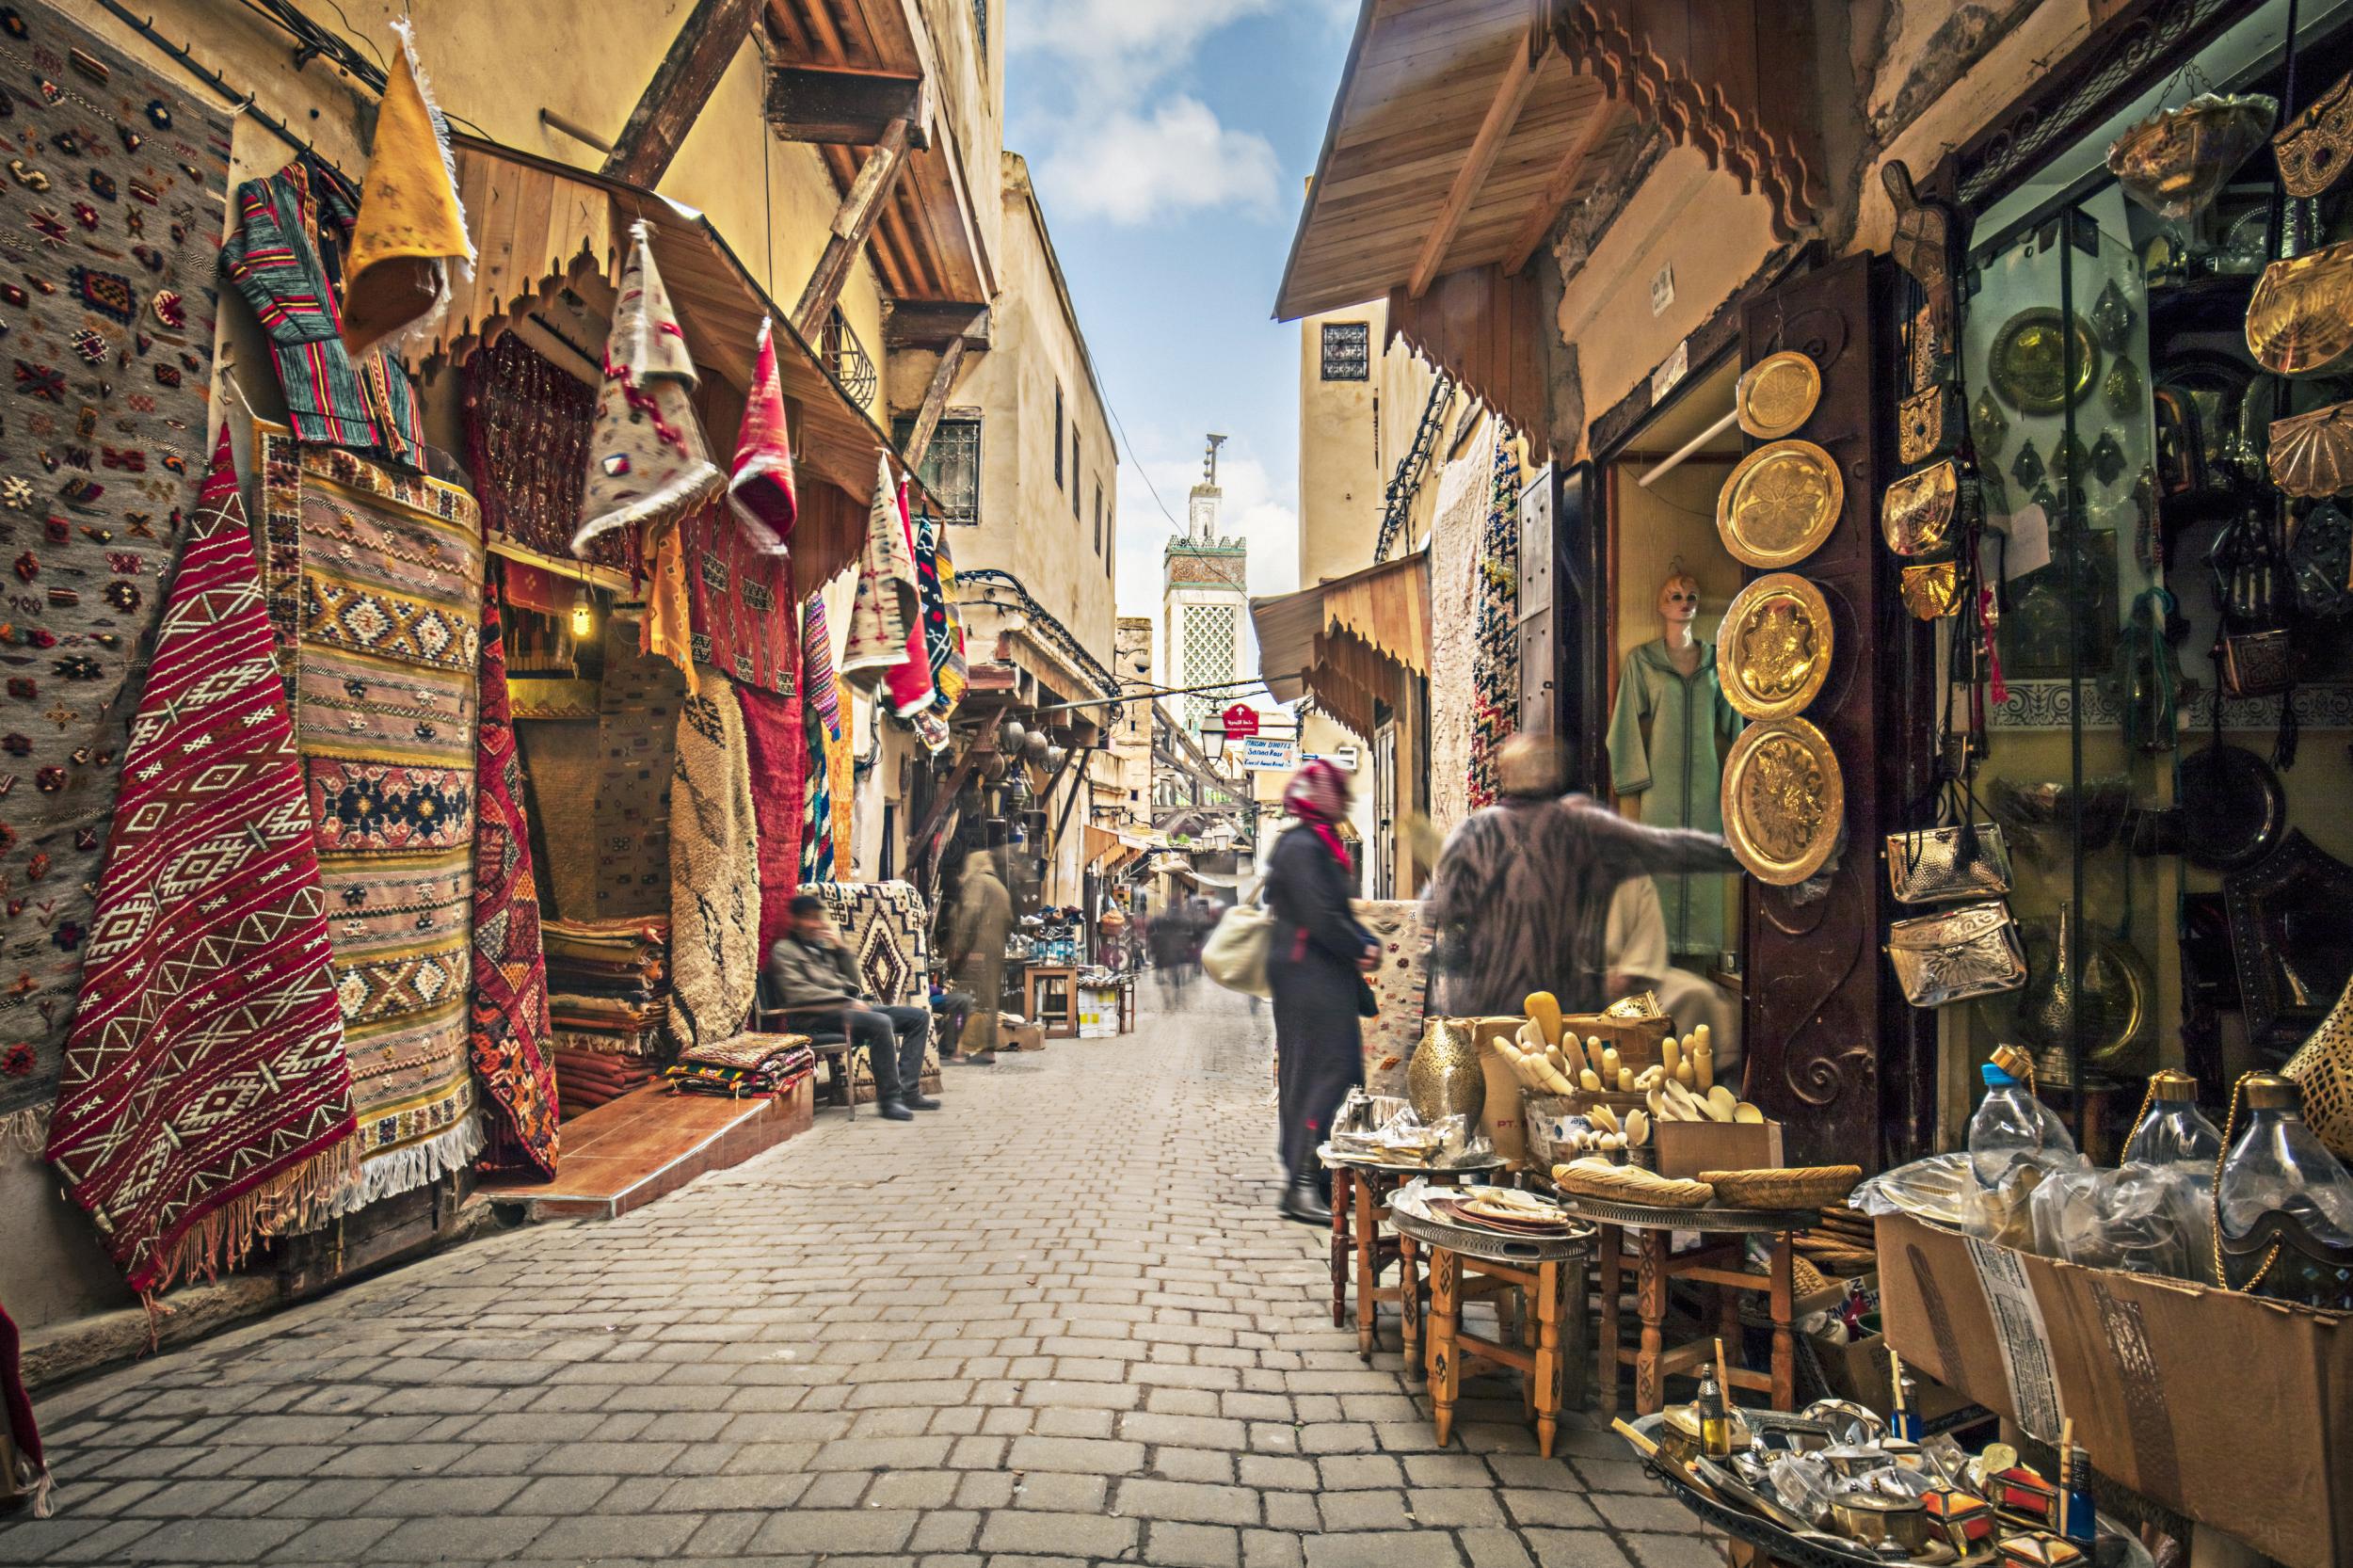 Soak up the atmosphere in a stroll through the historic medina